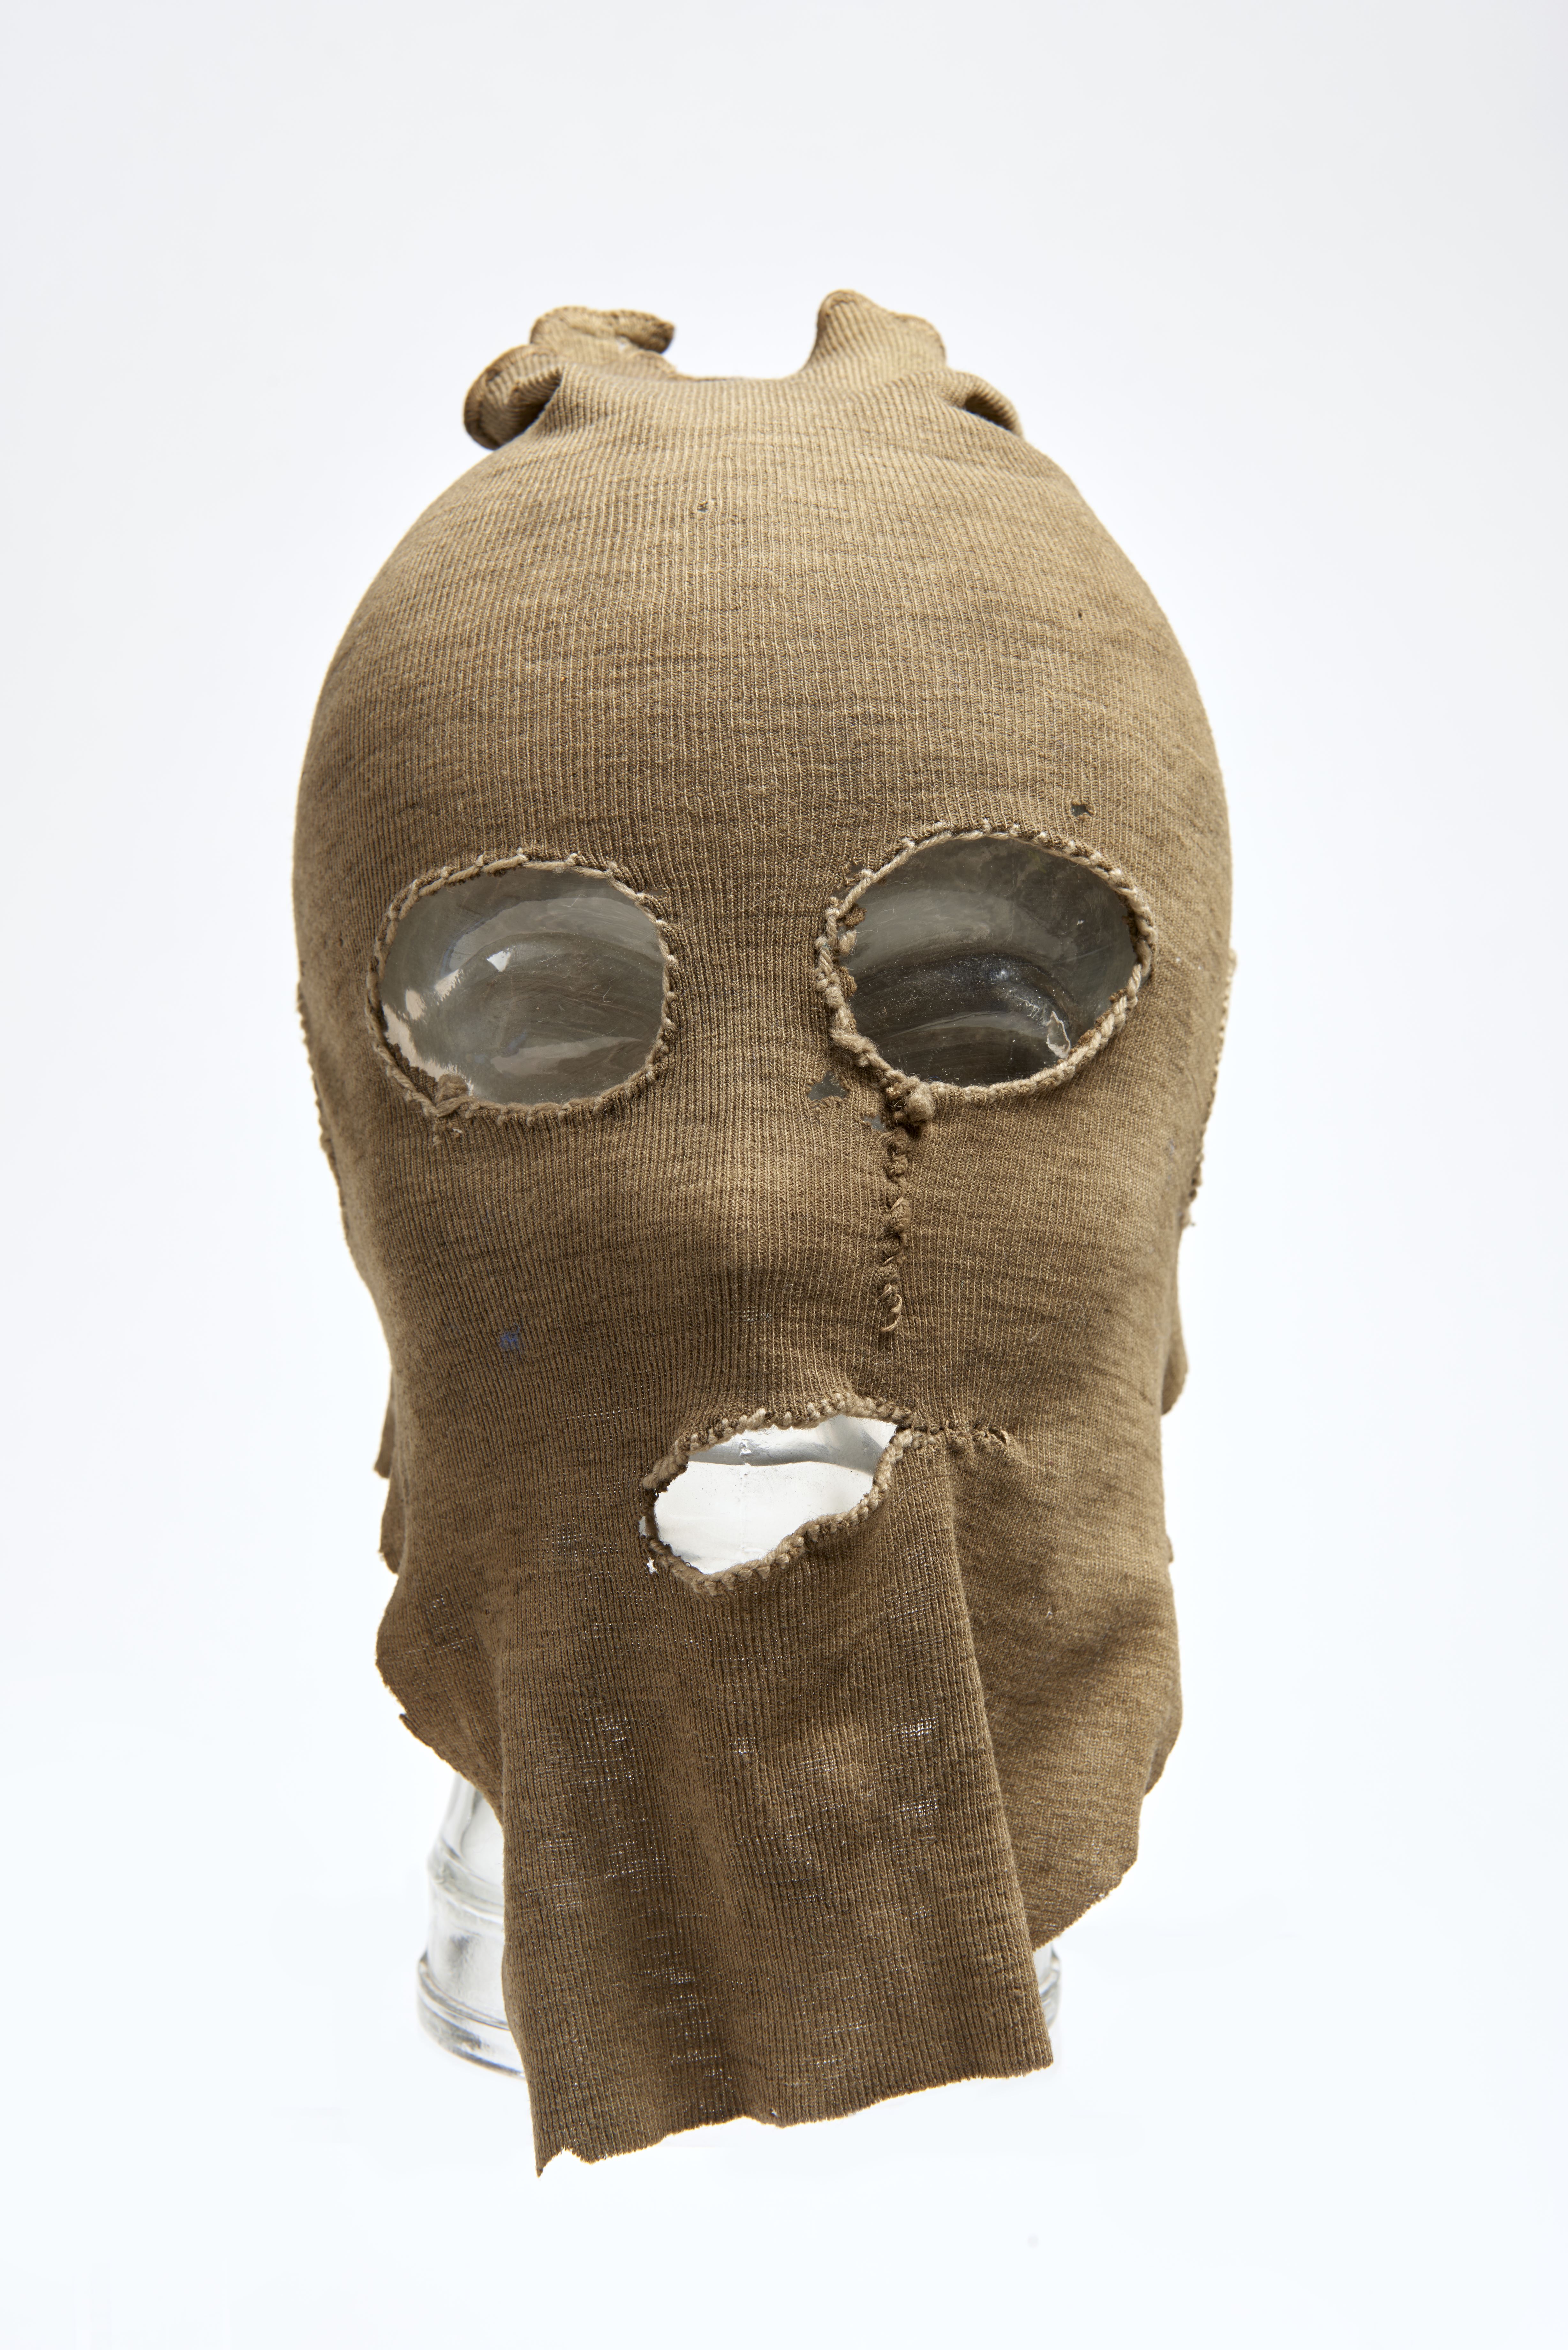 12. Mask from the murder case of PC George Gutteridge by Frederick Browne & William Kennedy, 1927 ∏ Museum of London